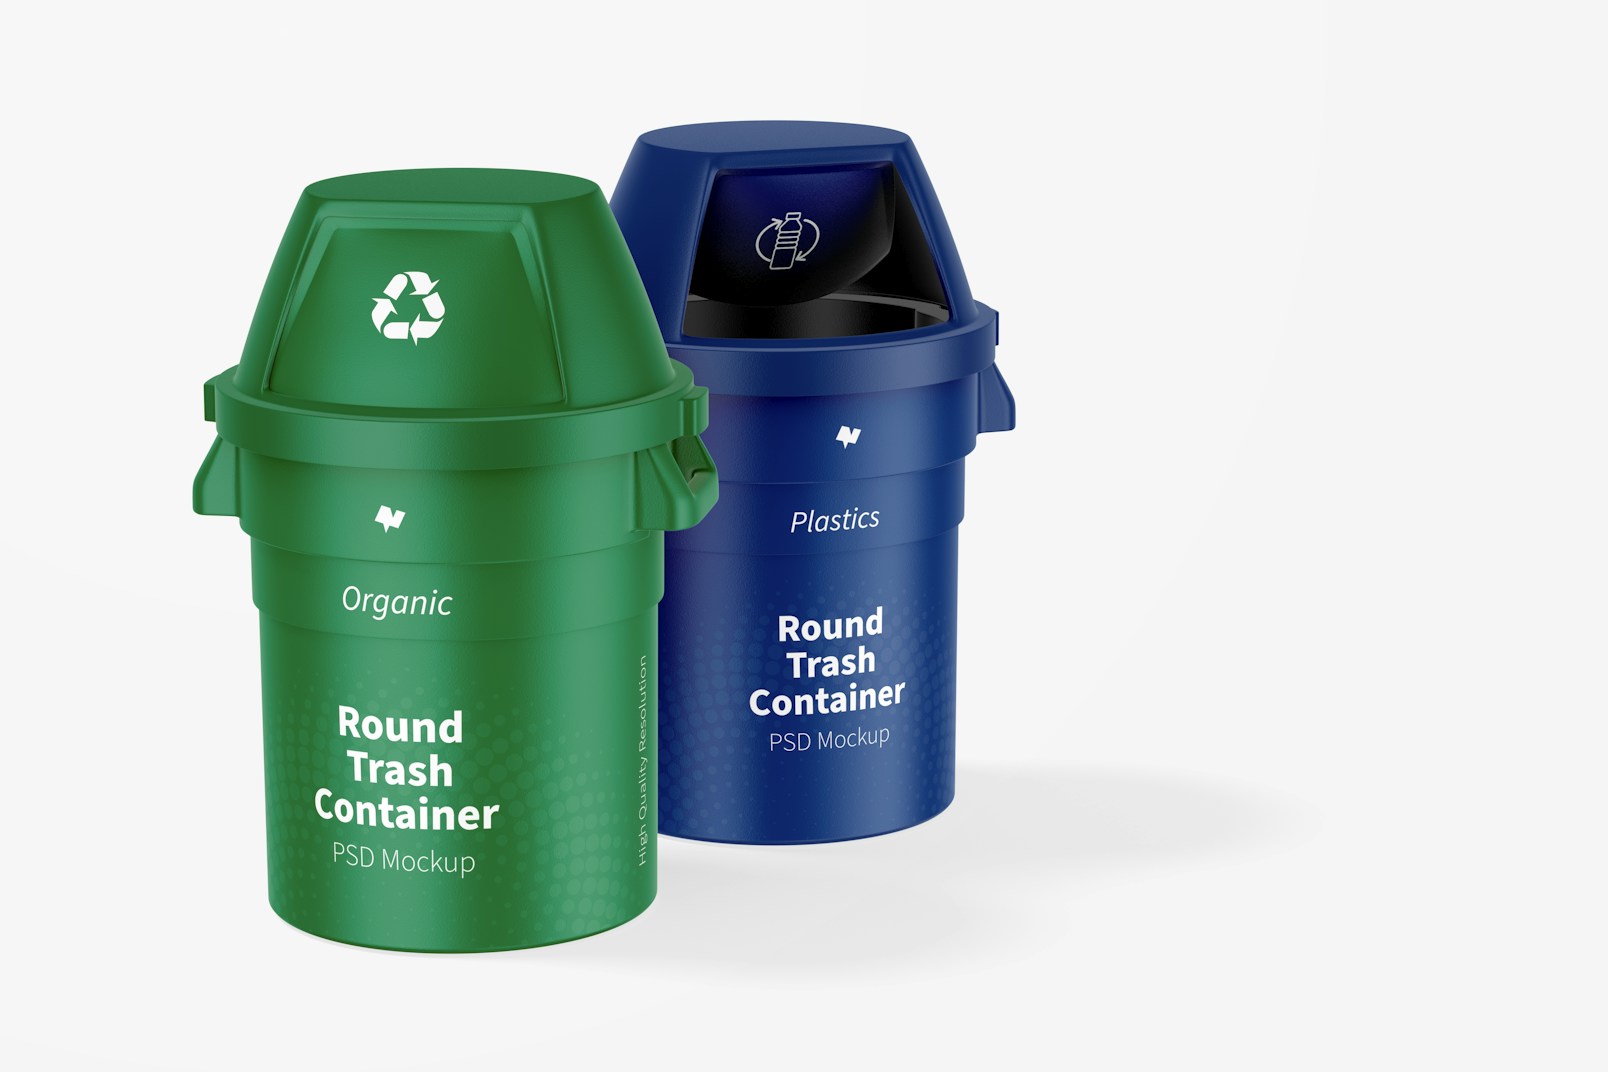 Round Trash Containers Mockup, Perspective